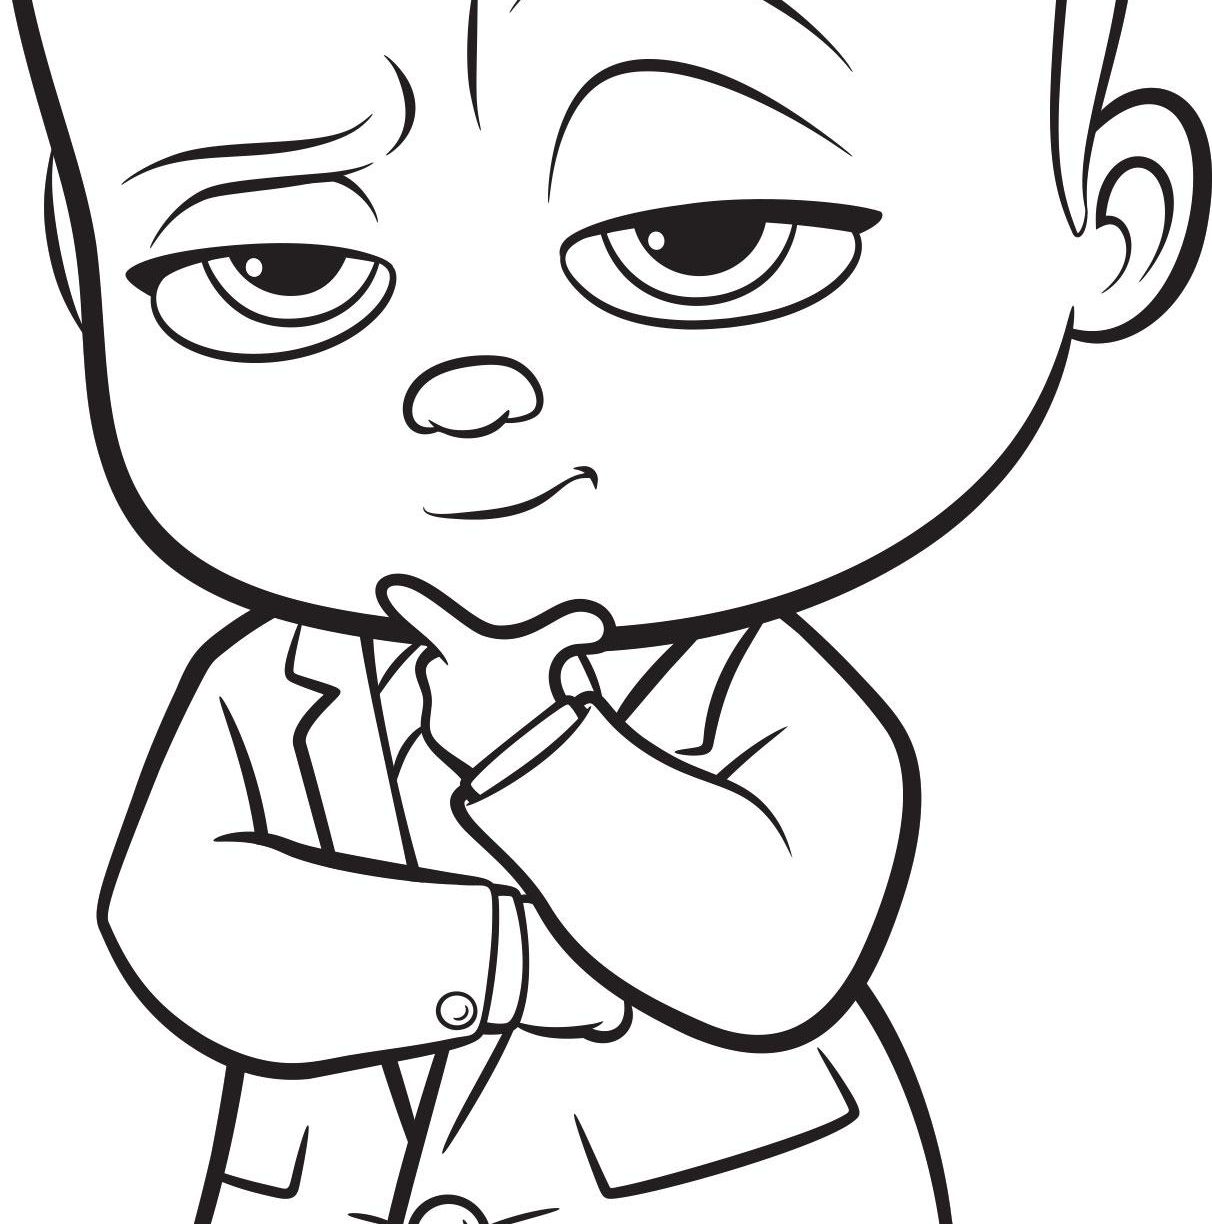 Download The Boss Baby Coloring Pages at GetColorings.com | Free printable colorings pages to print and color